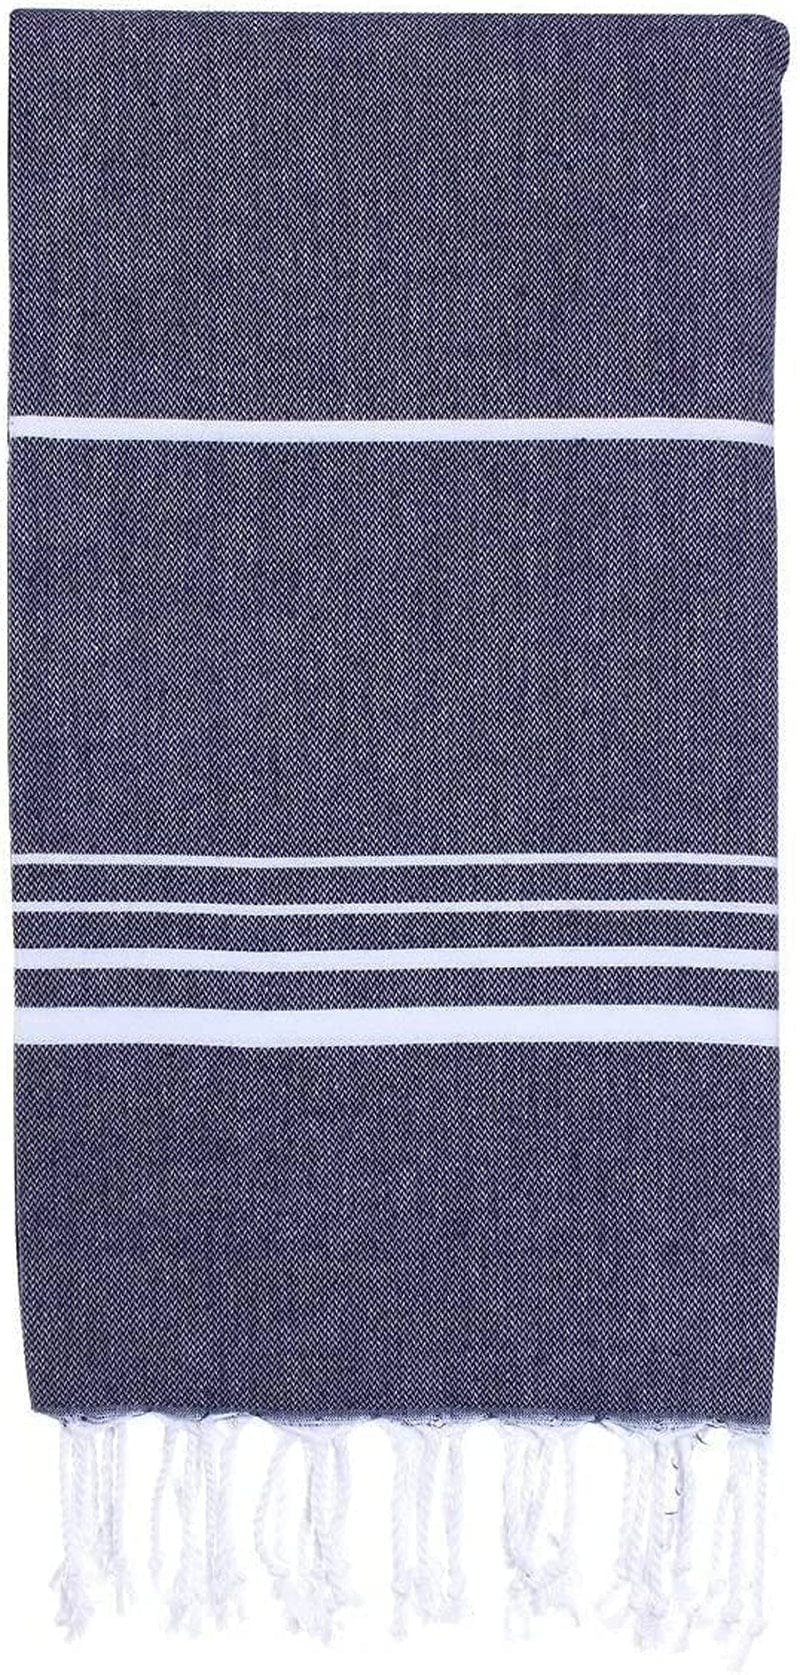 Cacala Turkish Beach Towels Quick Dry Prewashed for Soft Feel Extra Large Blanket Peshtemal for Bathroom, Travel, Pool, Swim, Yoga, Face, Hair and Gym Paradise, 37 in X 70 In, Aqua Home & Garden > Linens & Bedding > Towels Cacala Dark Blue 37 in x 70 in 